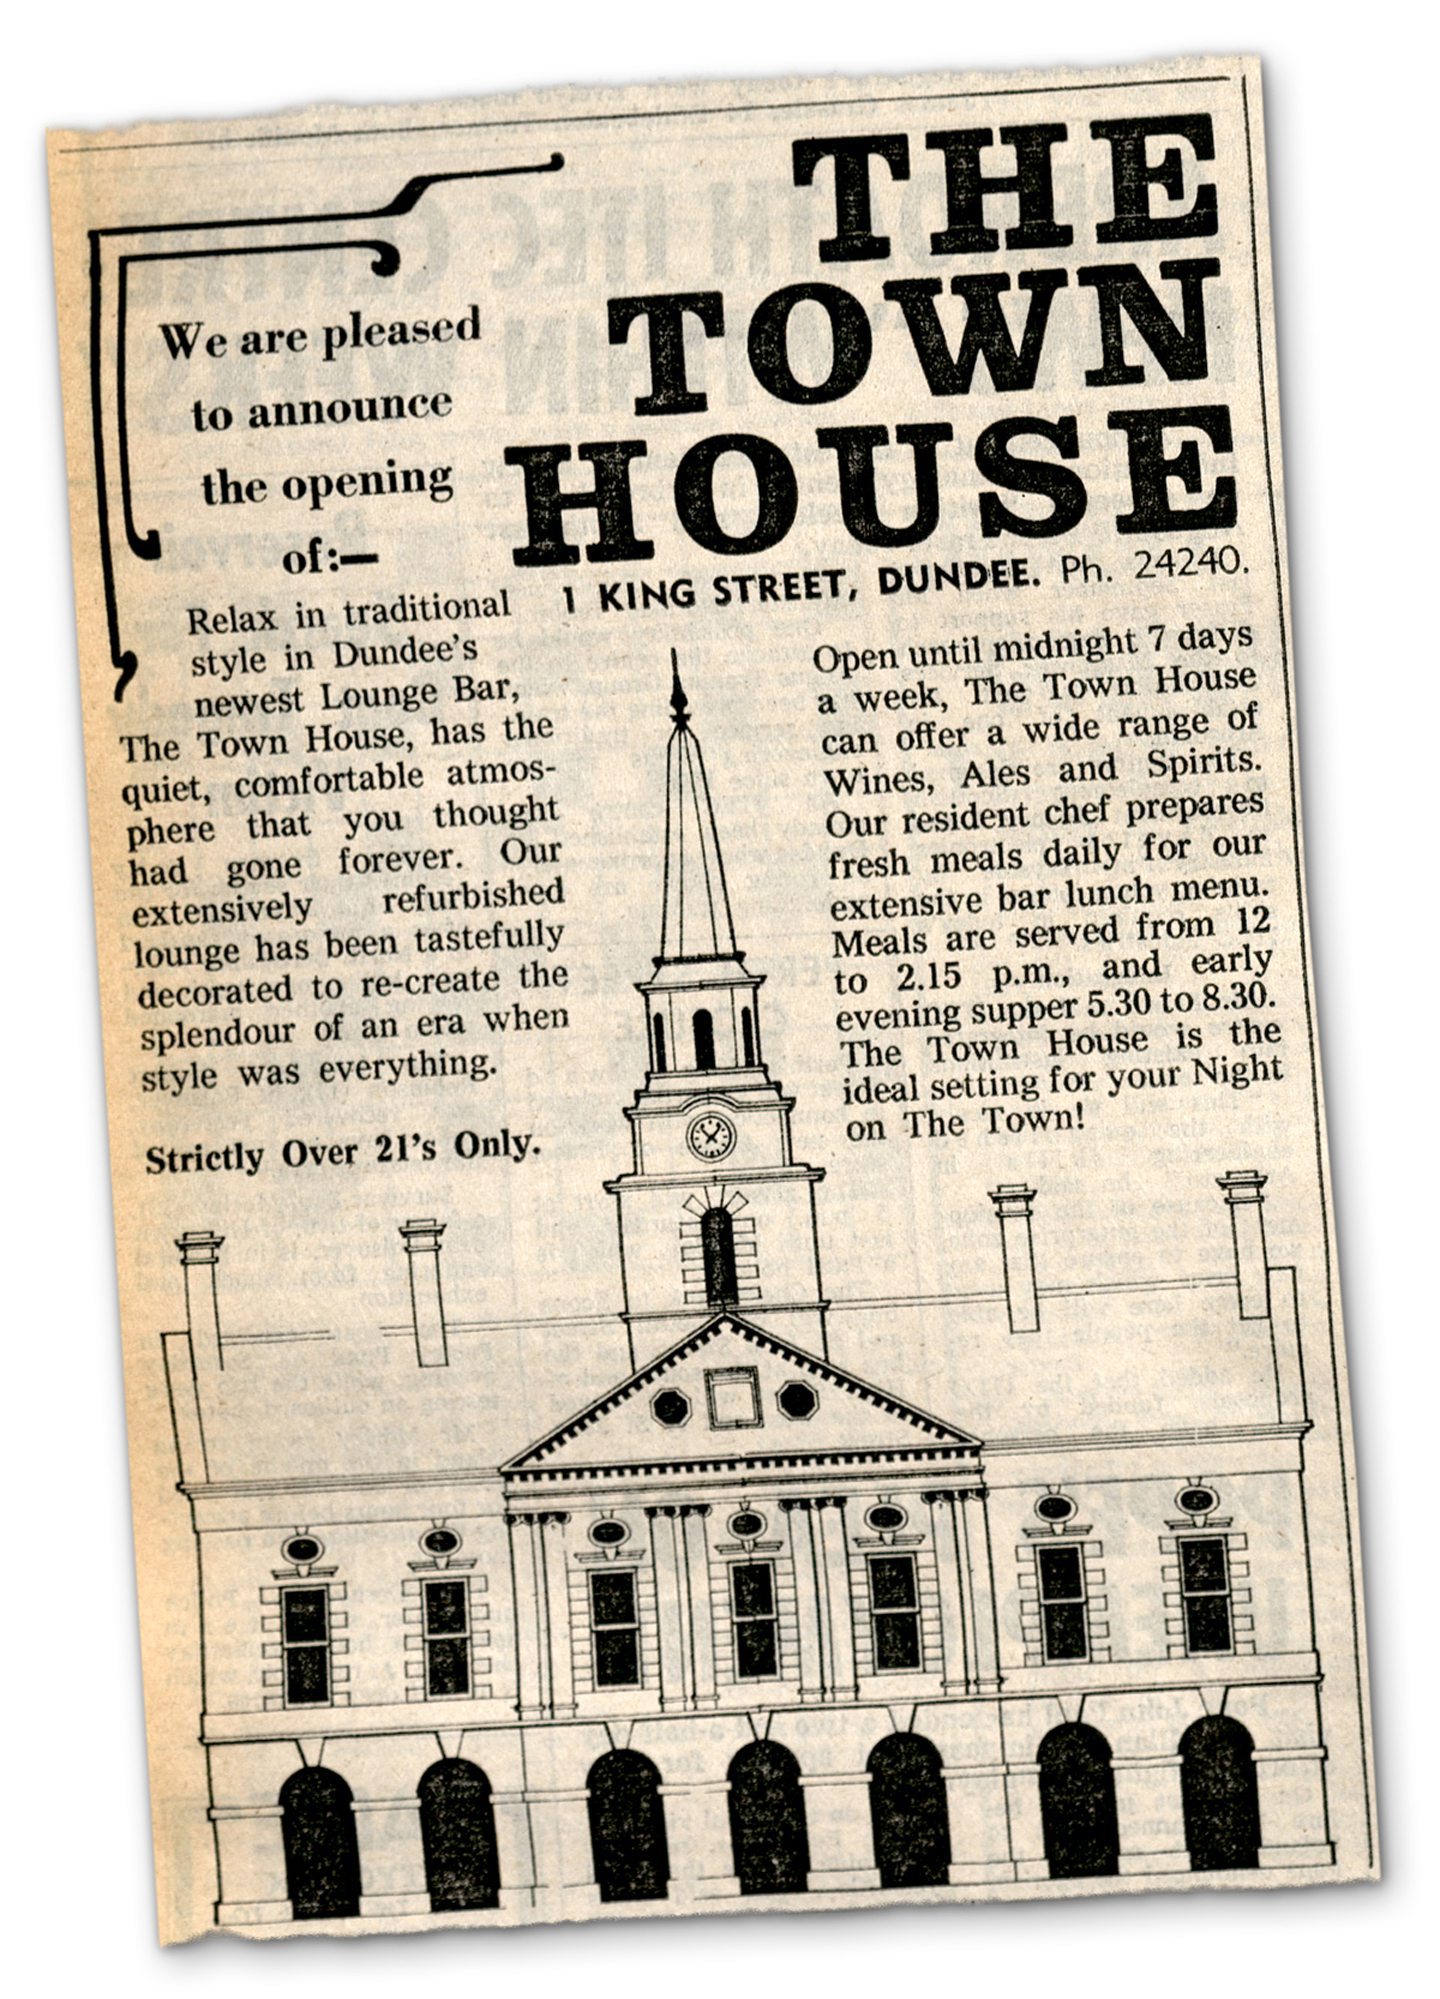 The advertising feature had high hopes for the Town House. Image: DC Thomson.